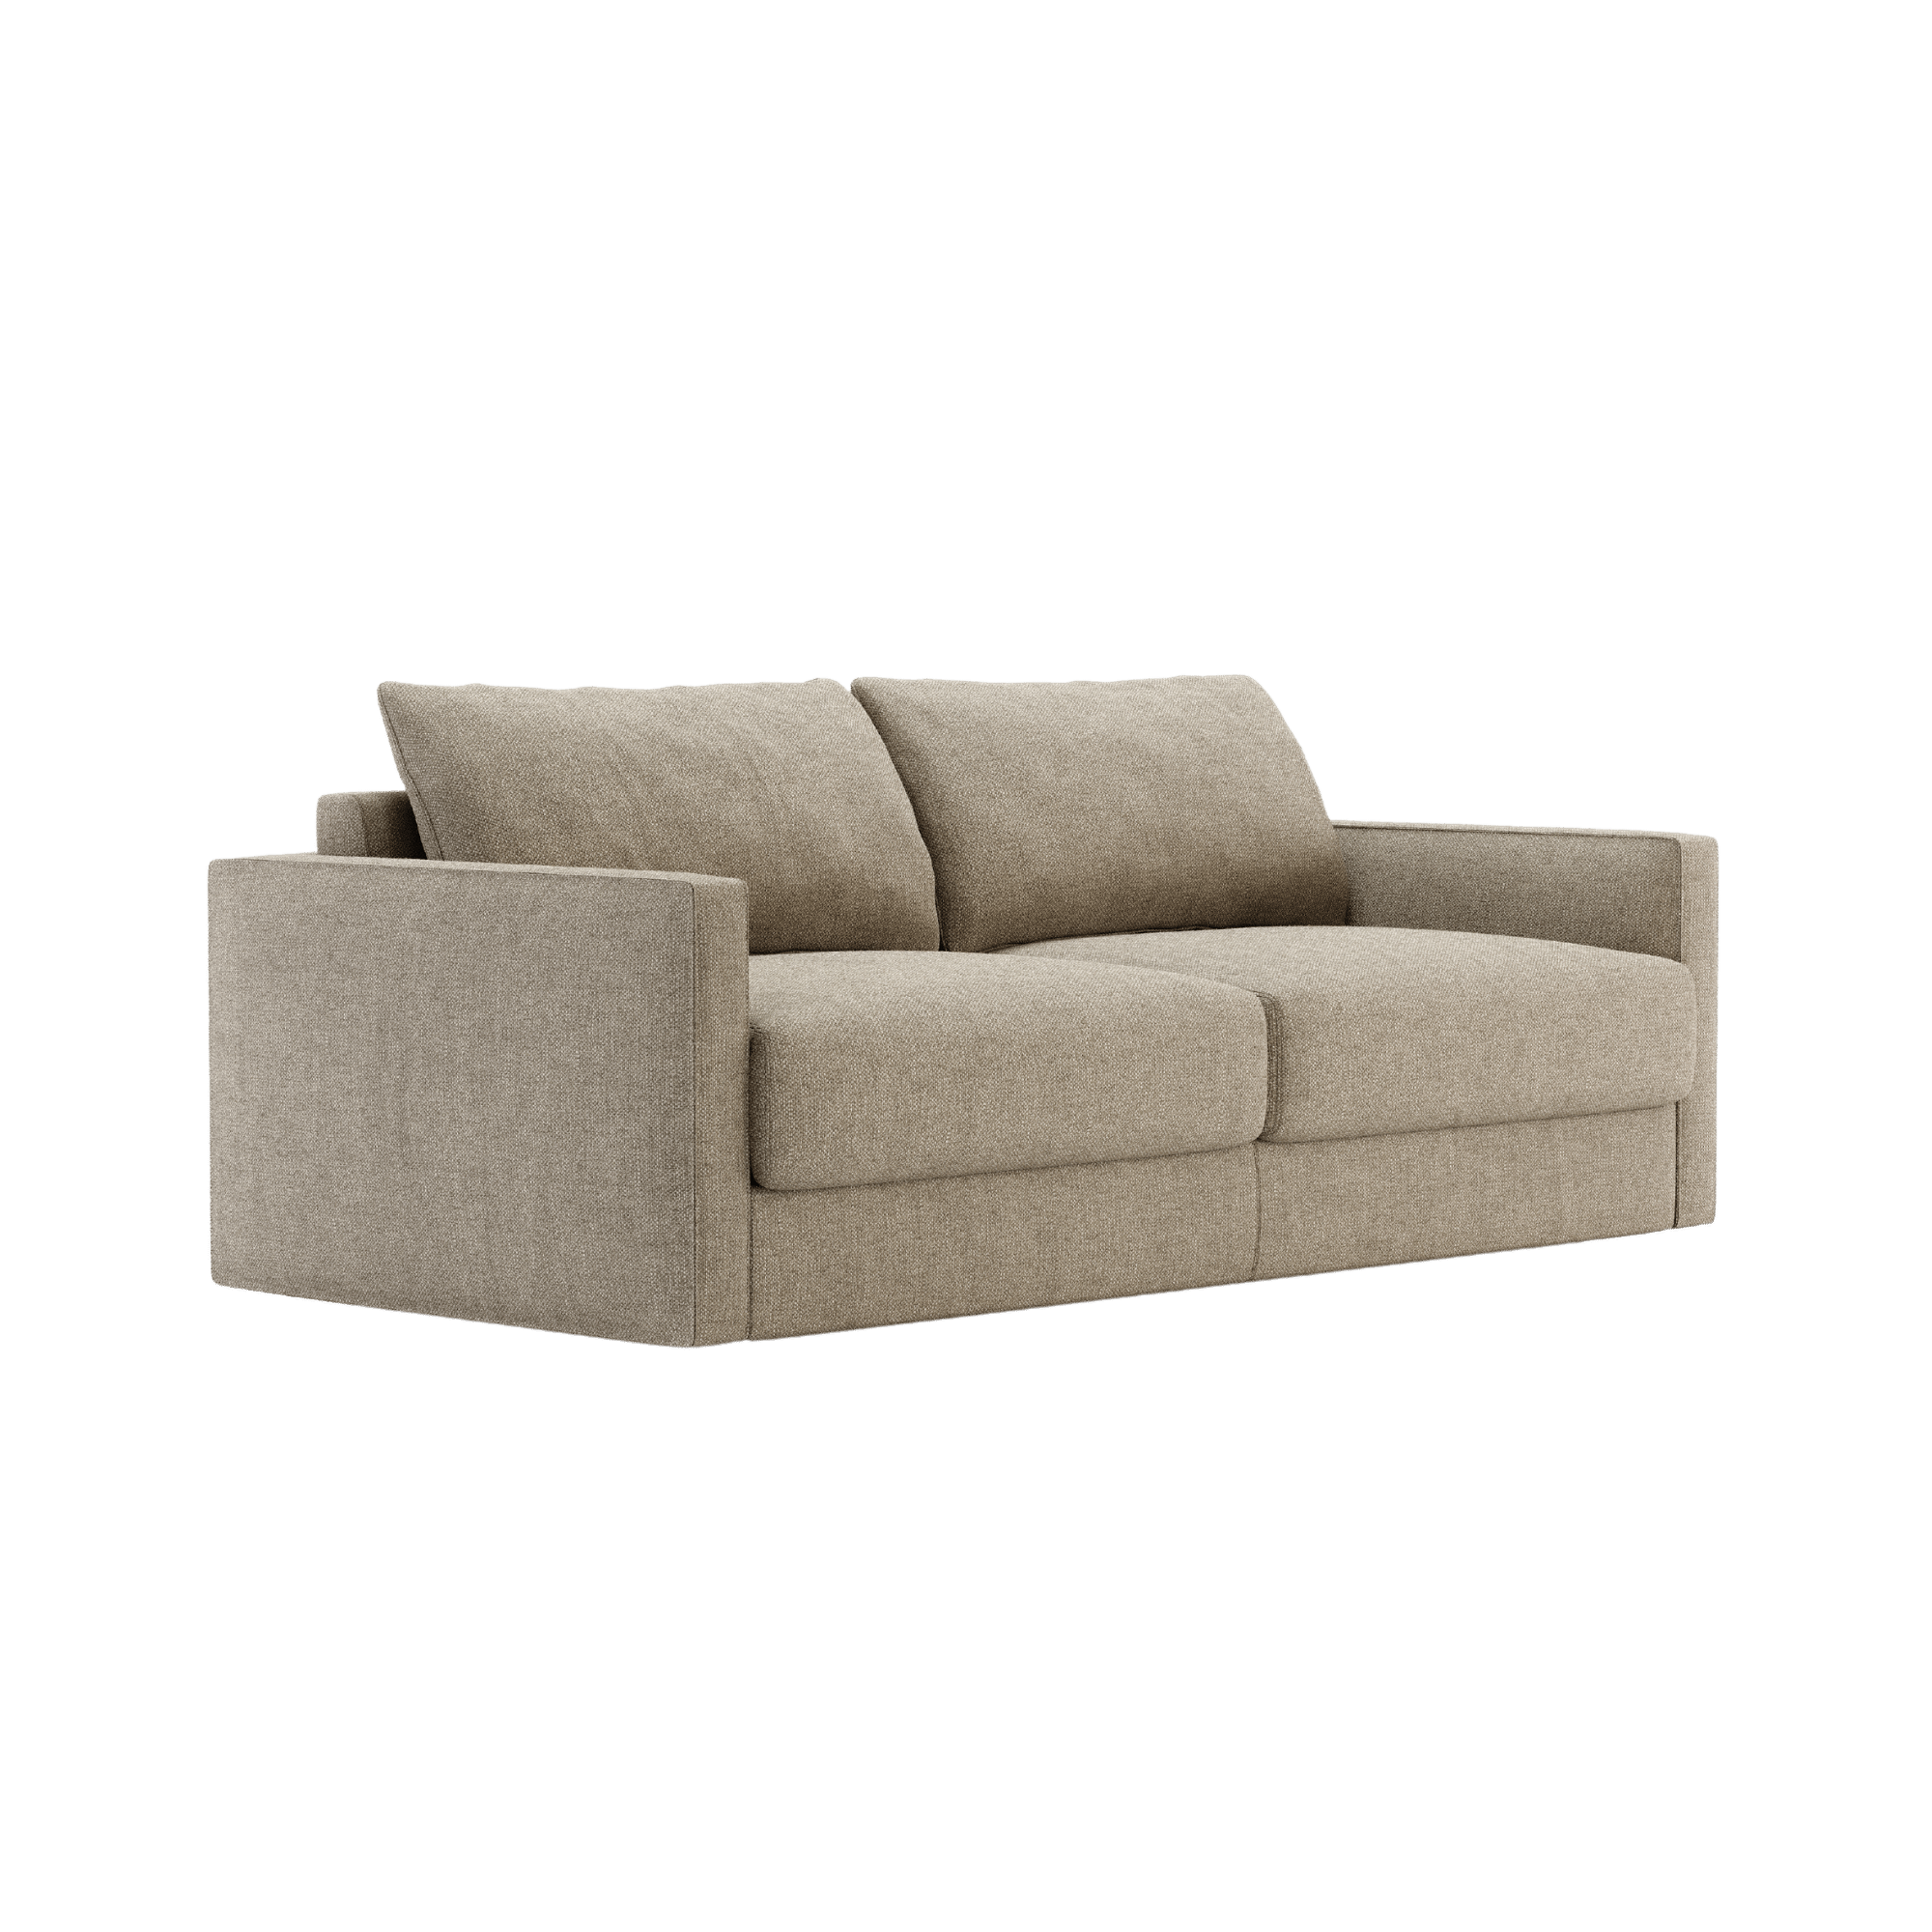 Beaumont Bed Sofa - THAT COOL LIVING